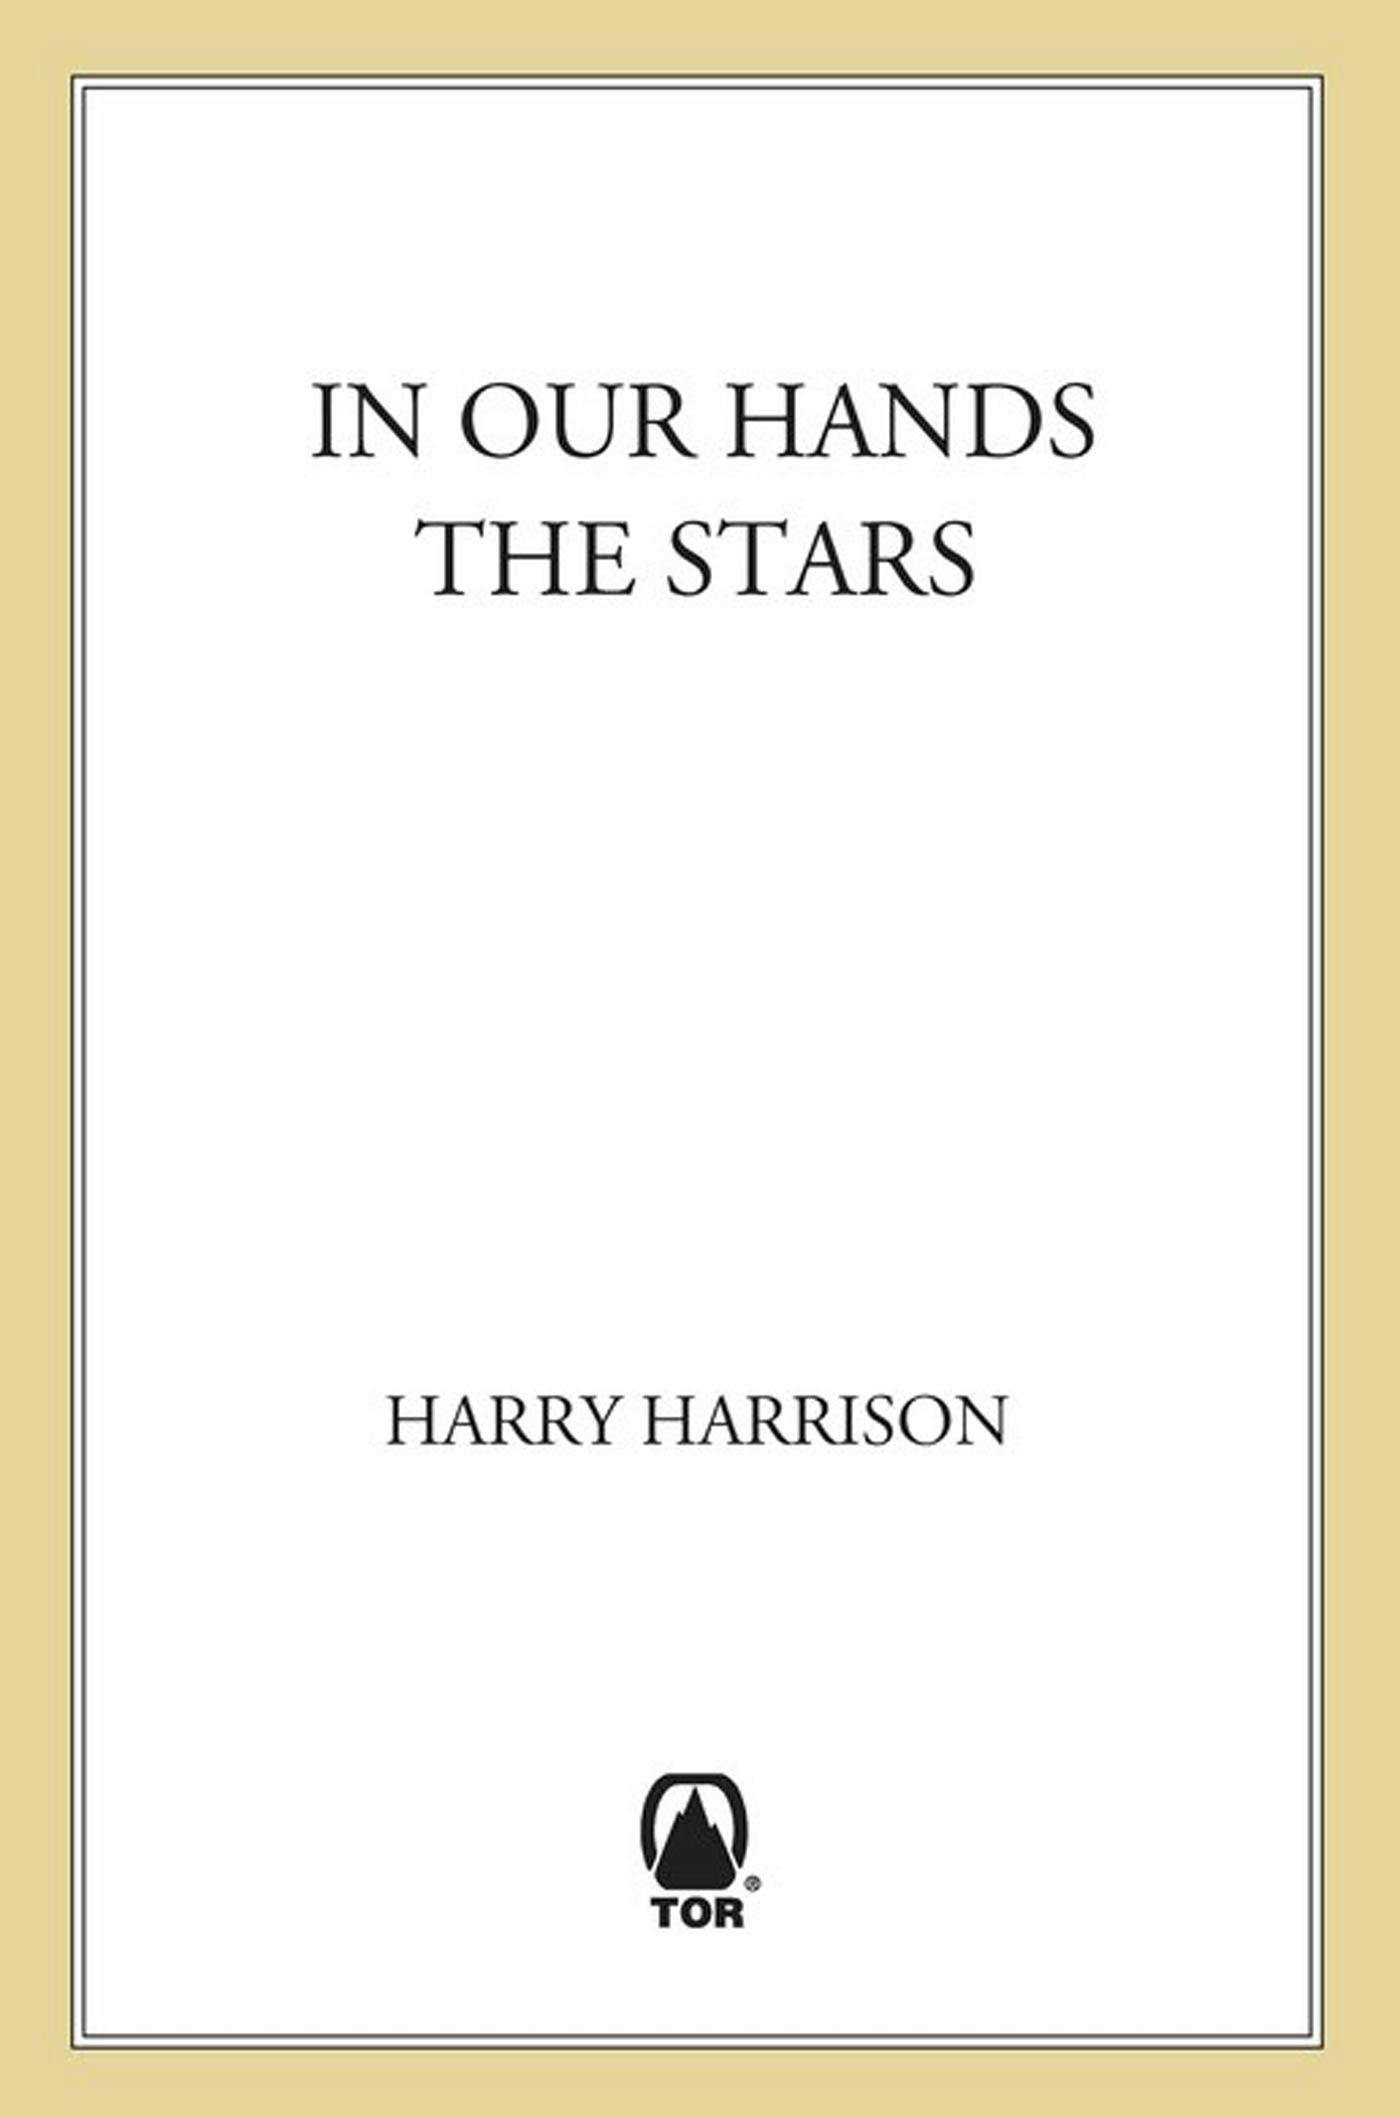 Cover for the book titled as: In Our Hands The Stars